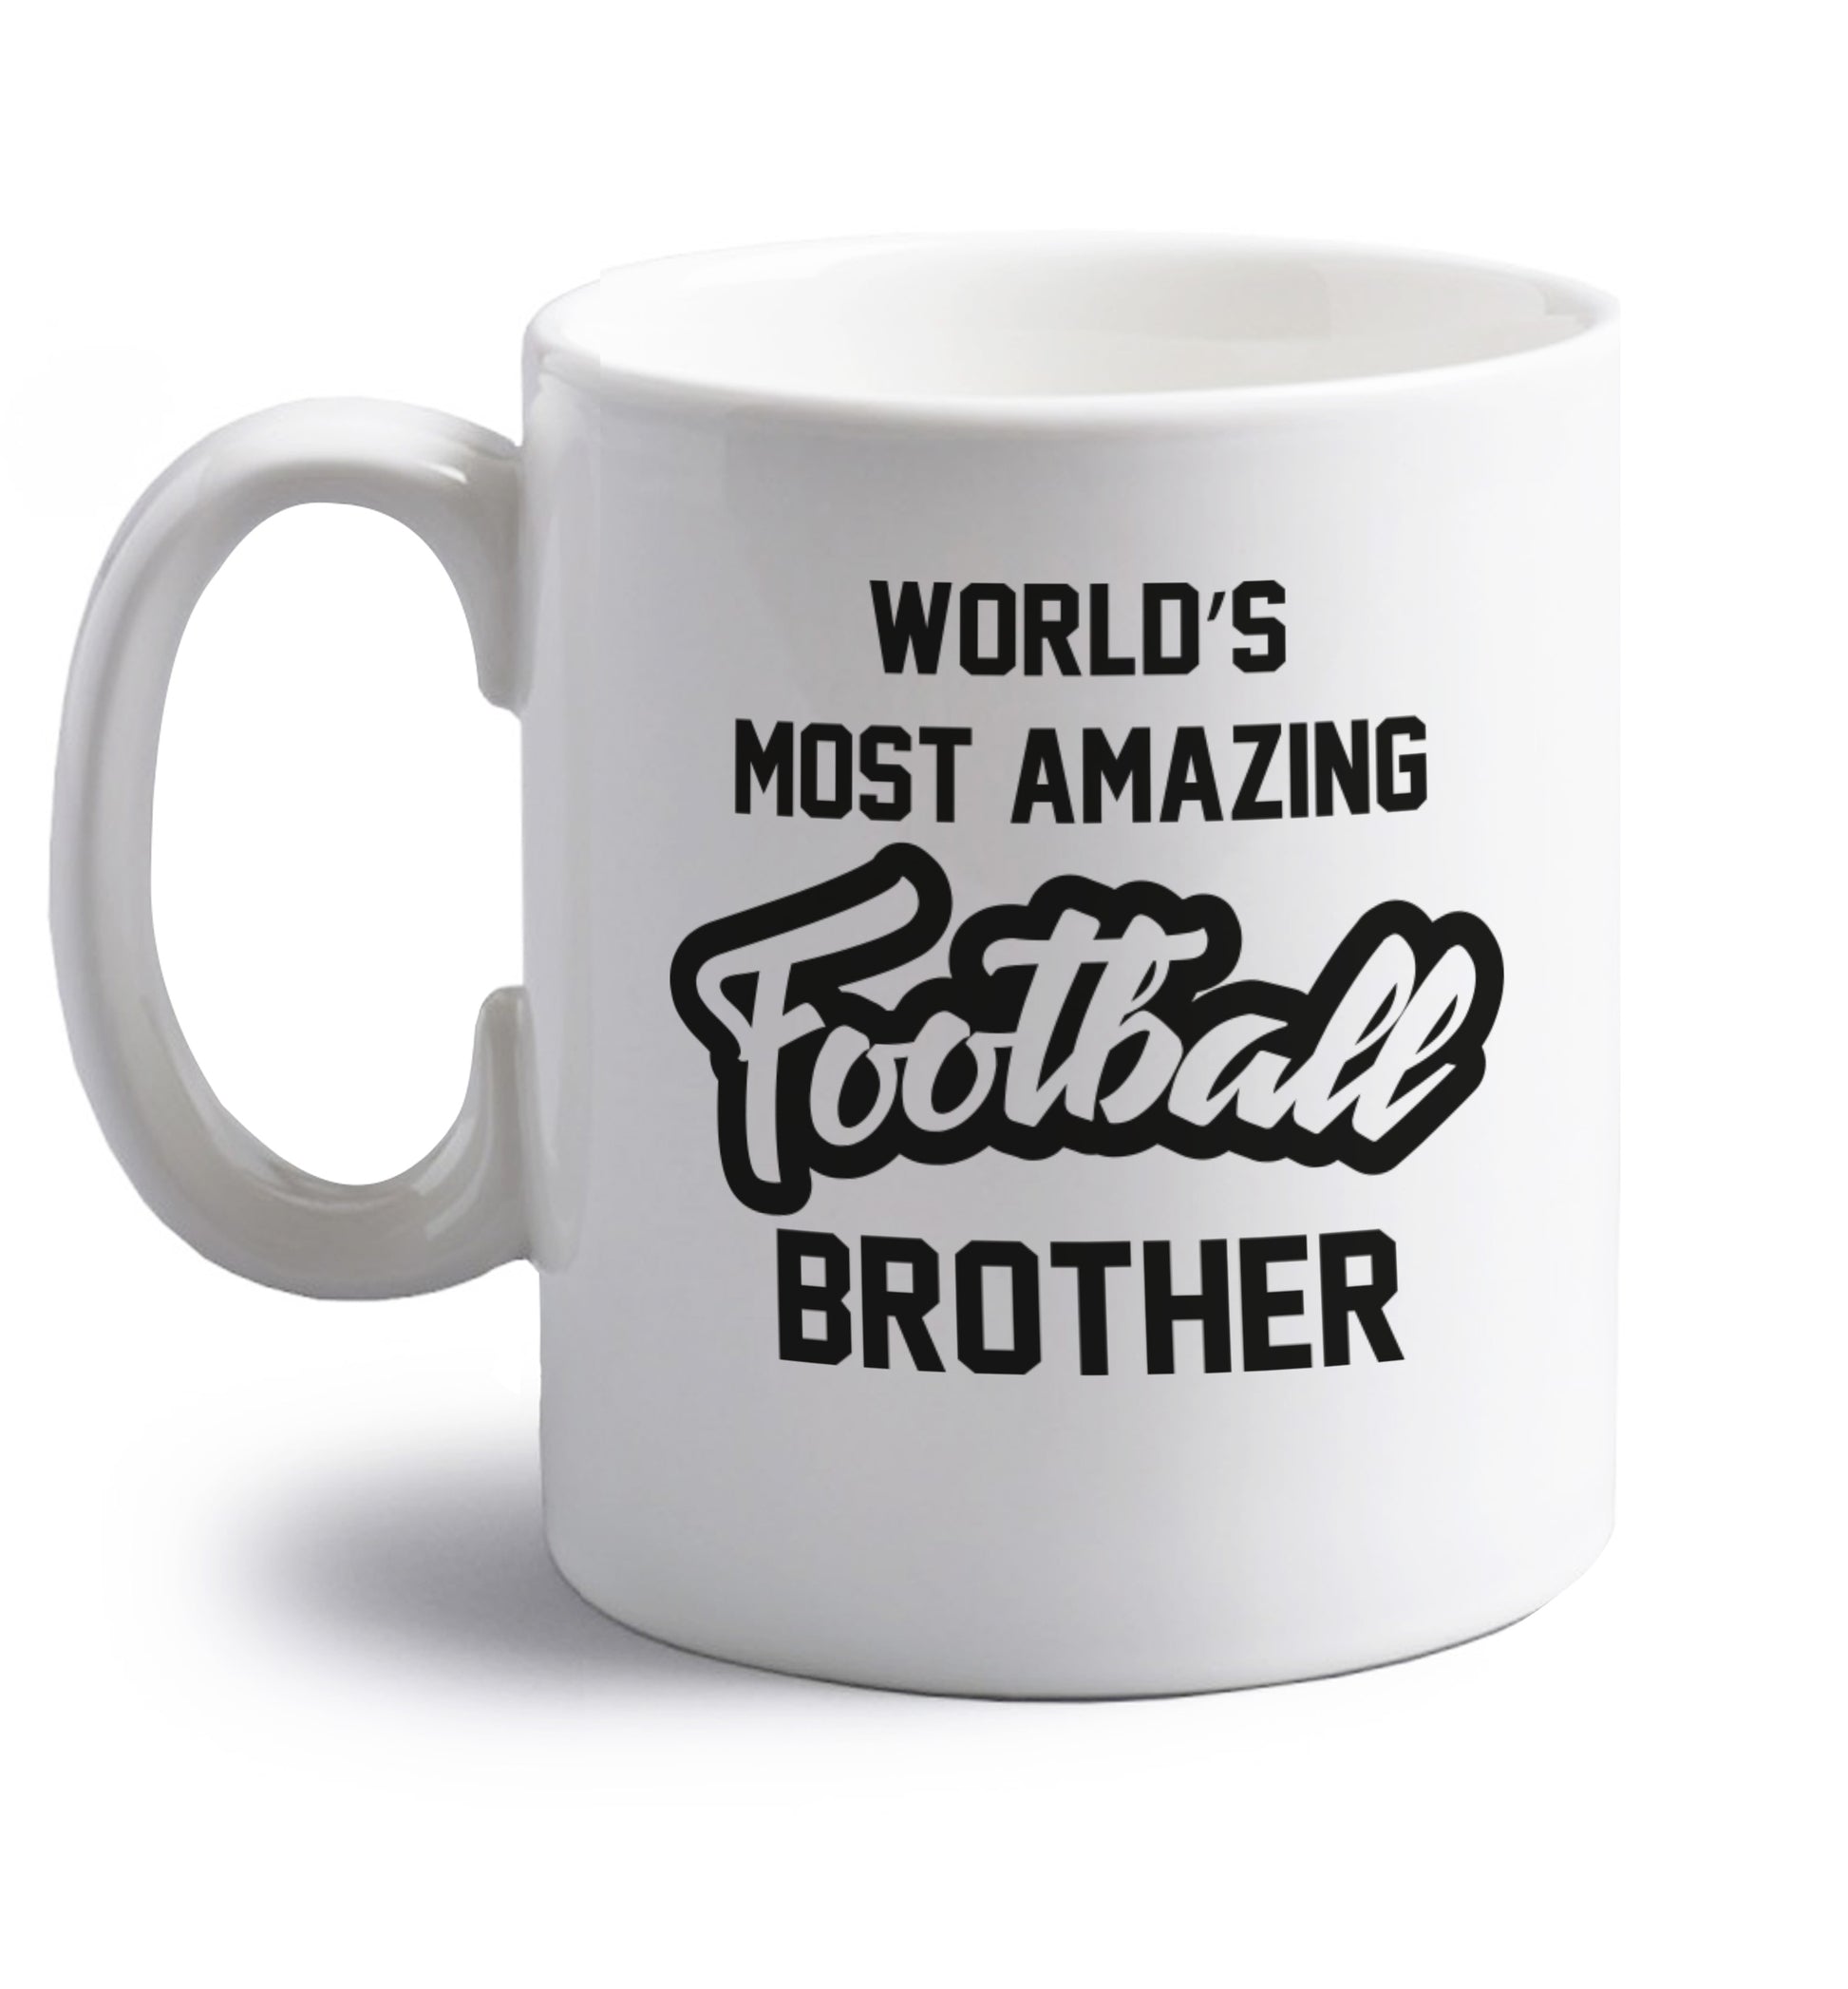 Worlds most amazing football brother right handed white ceramic mug 